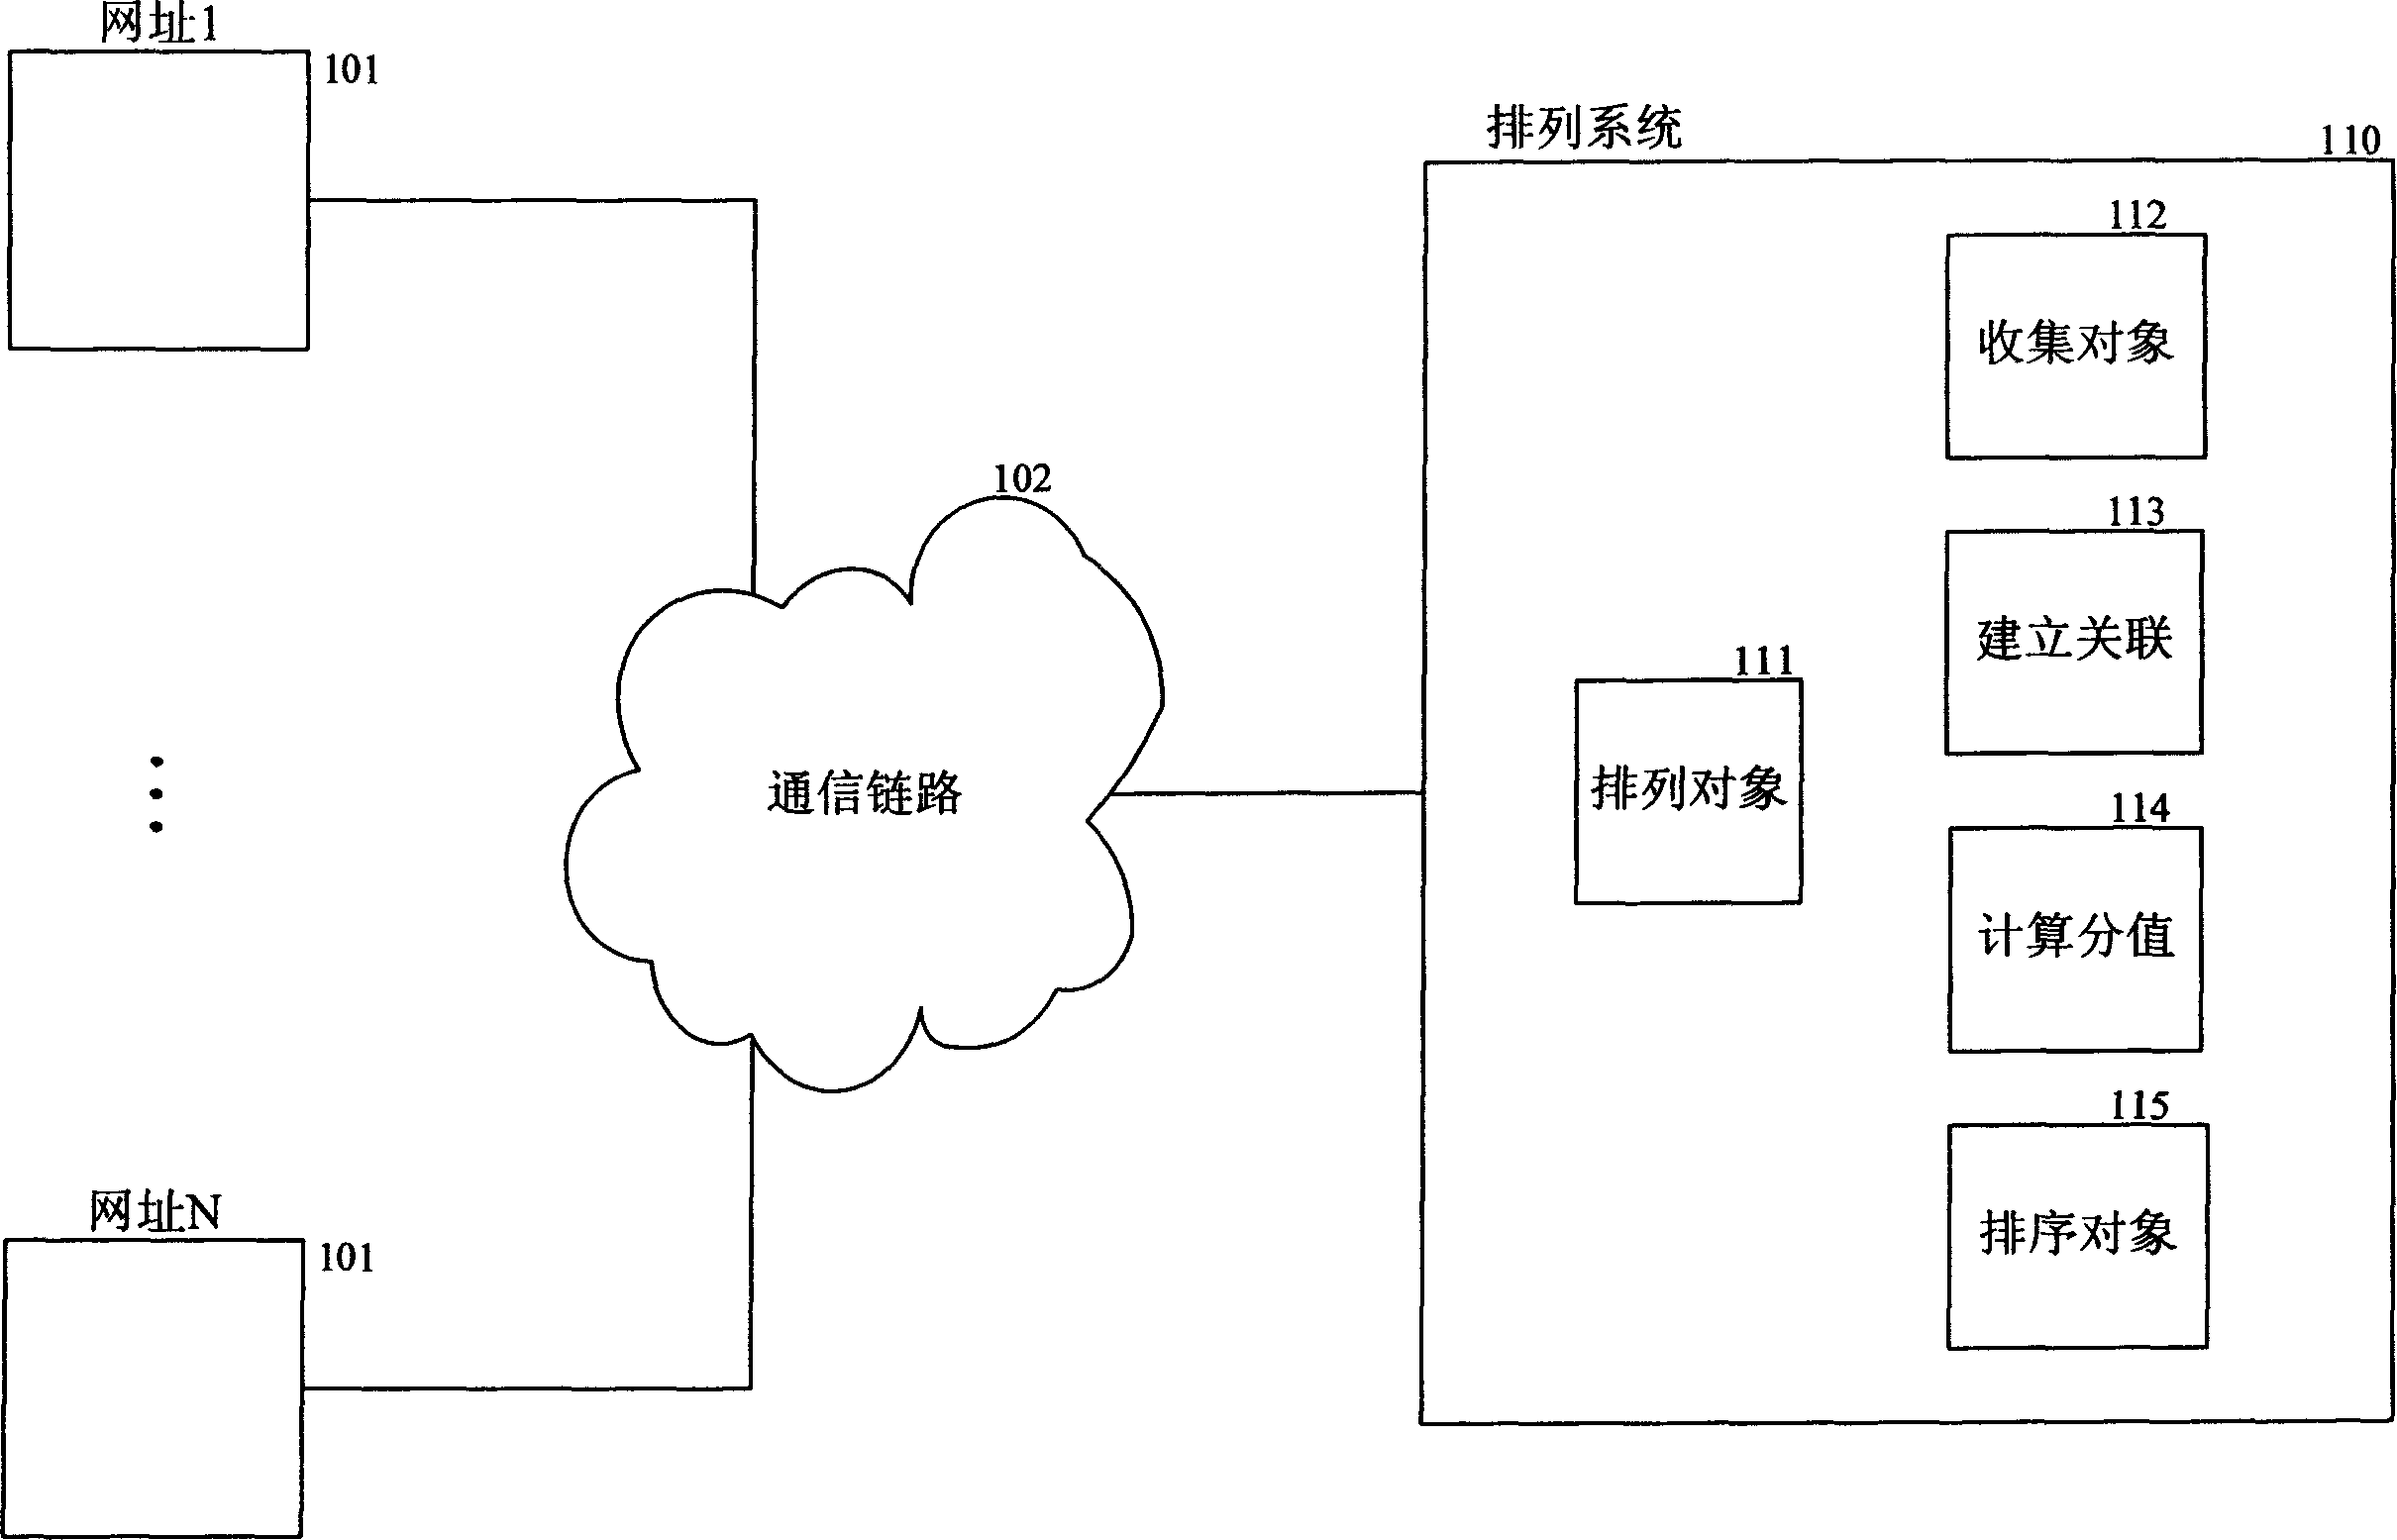 Method and system for ranking objects based on intra-type and inter-type relationships